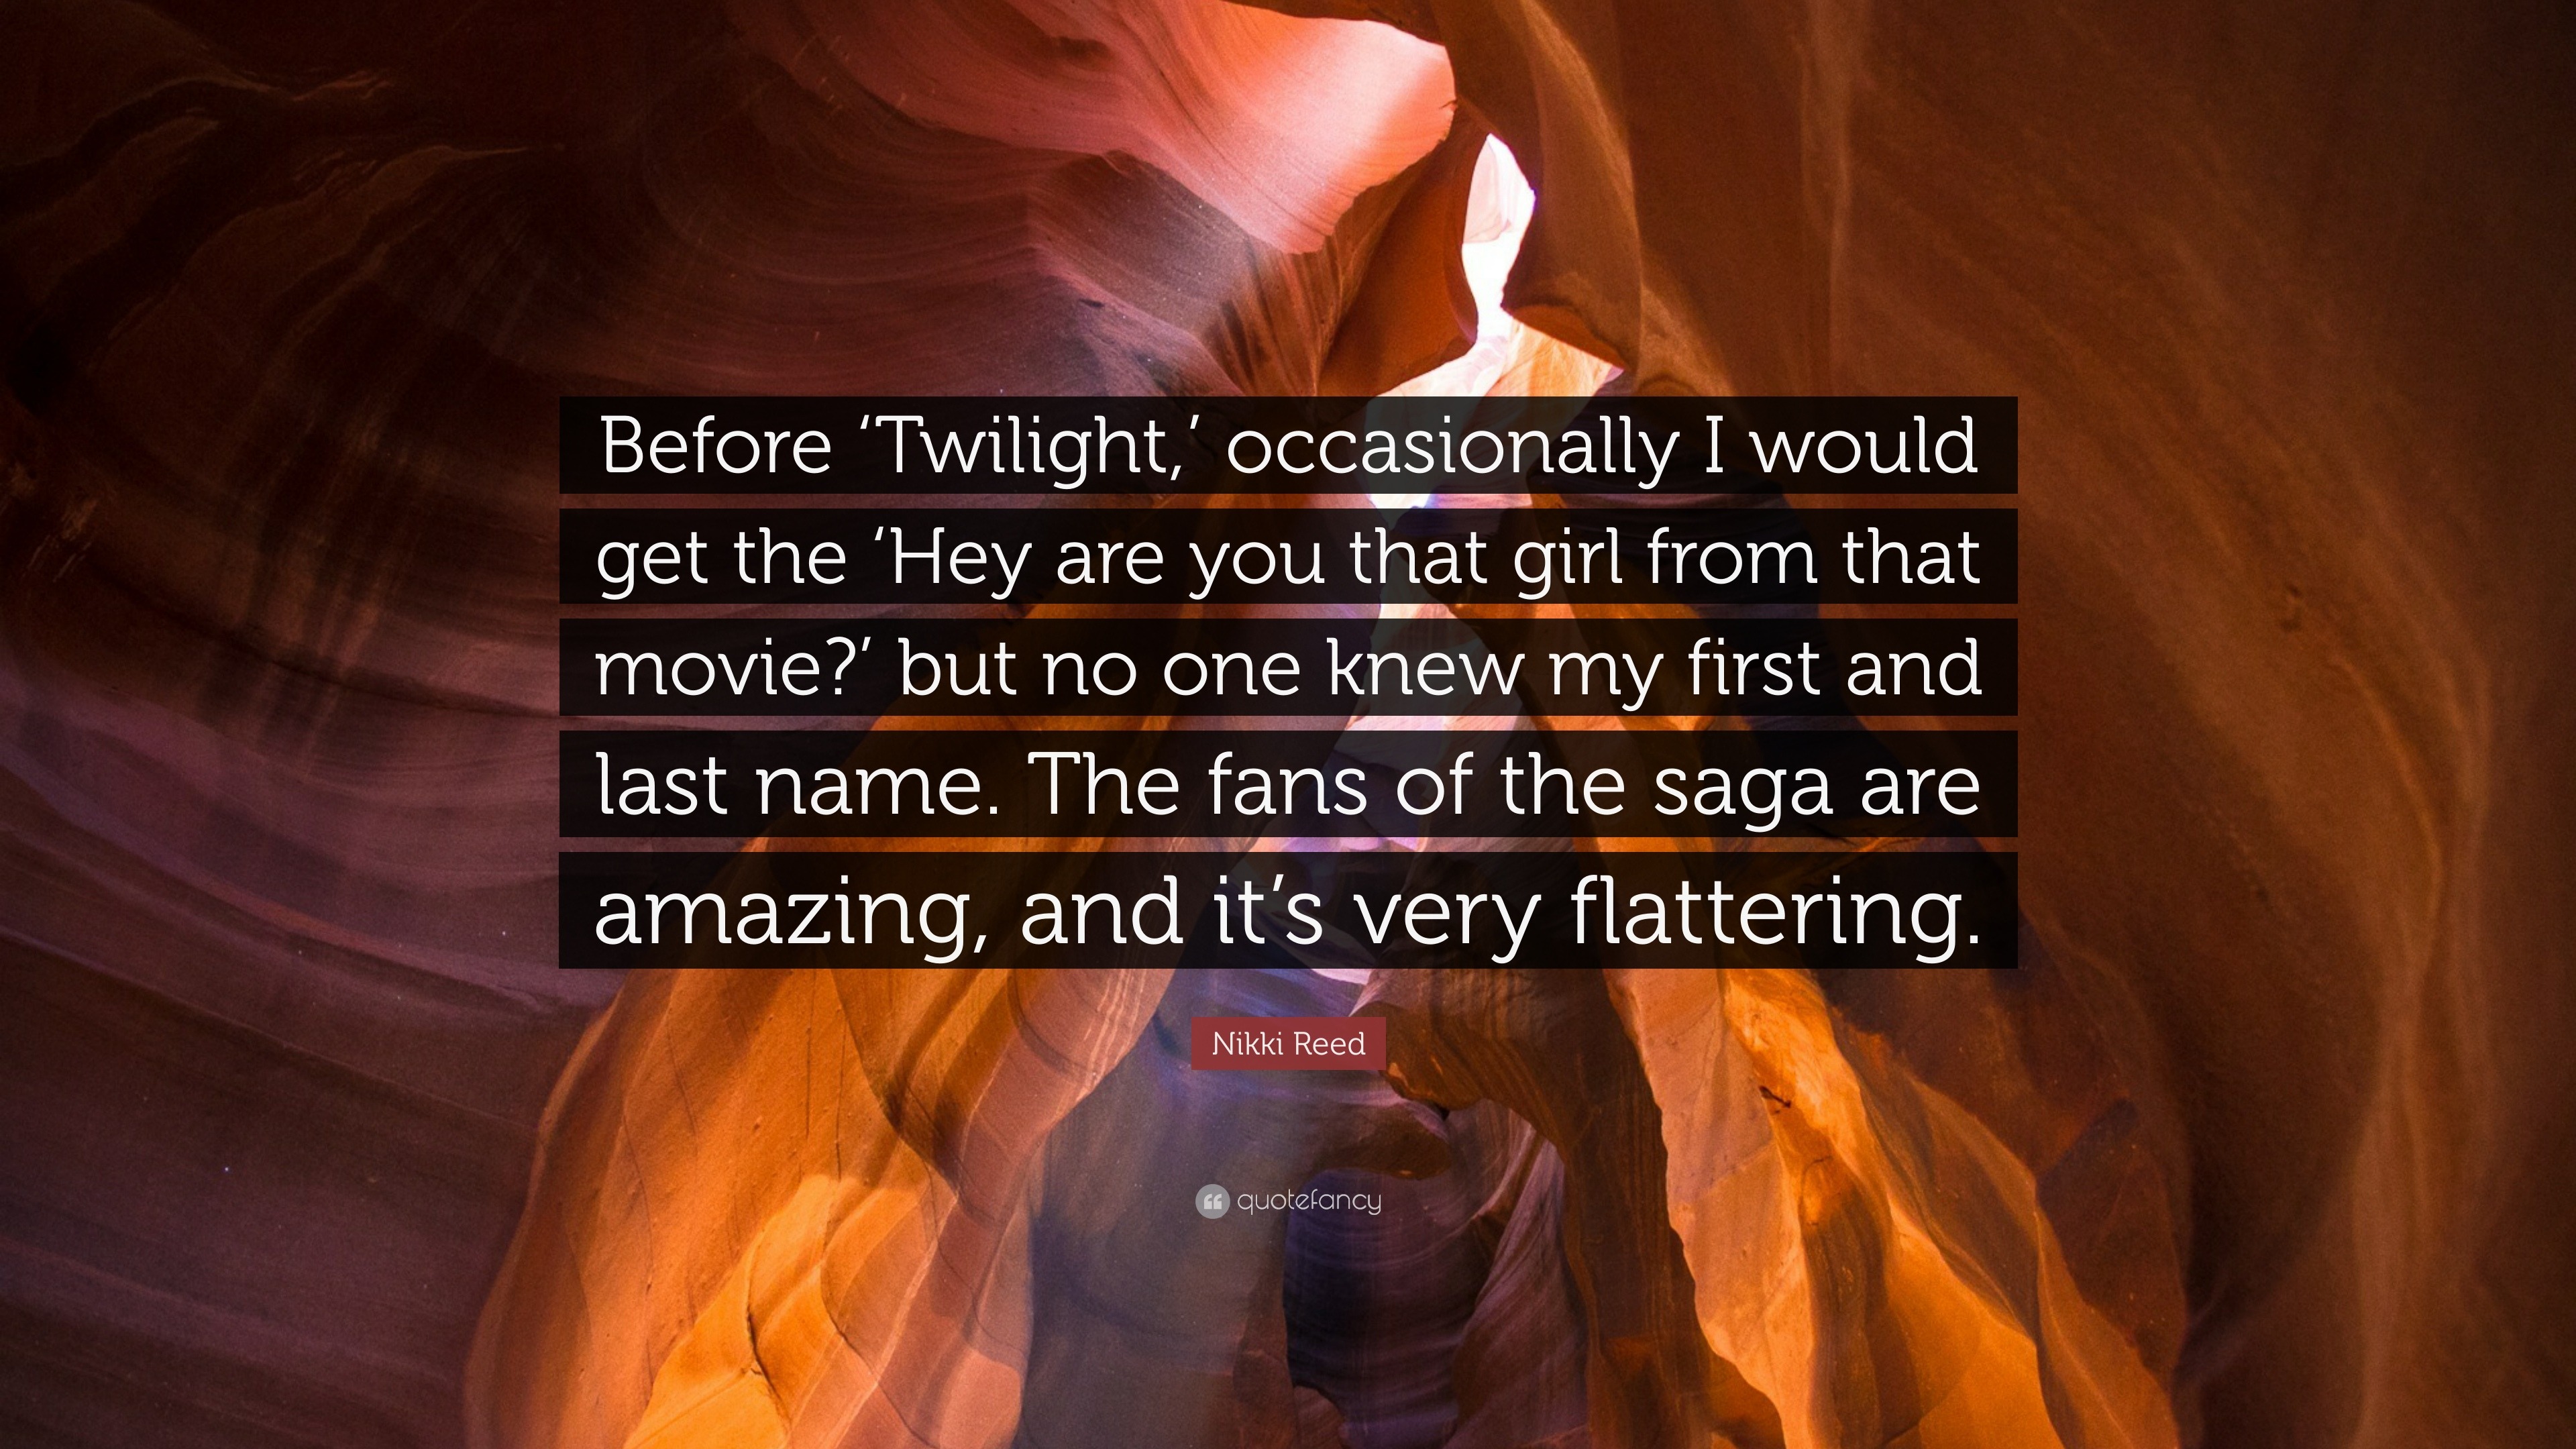 Nikki Reed Quote “Before Twilight occasionally I would the